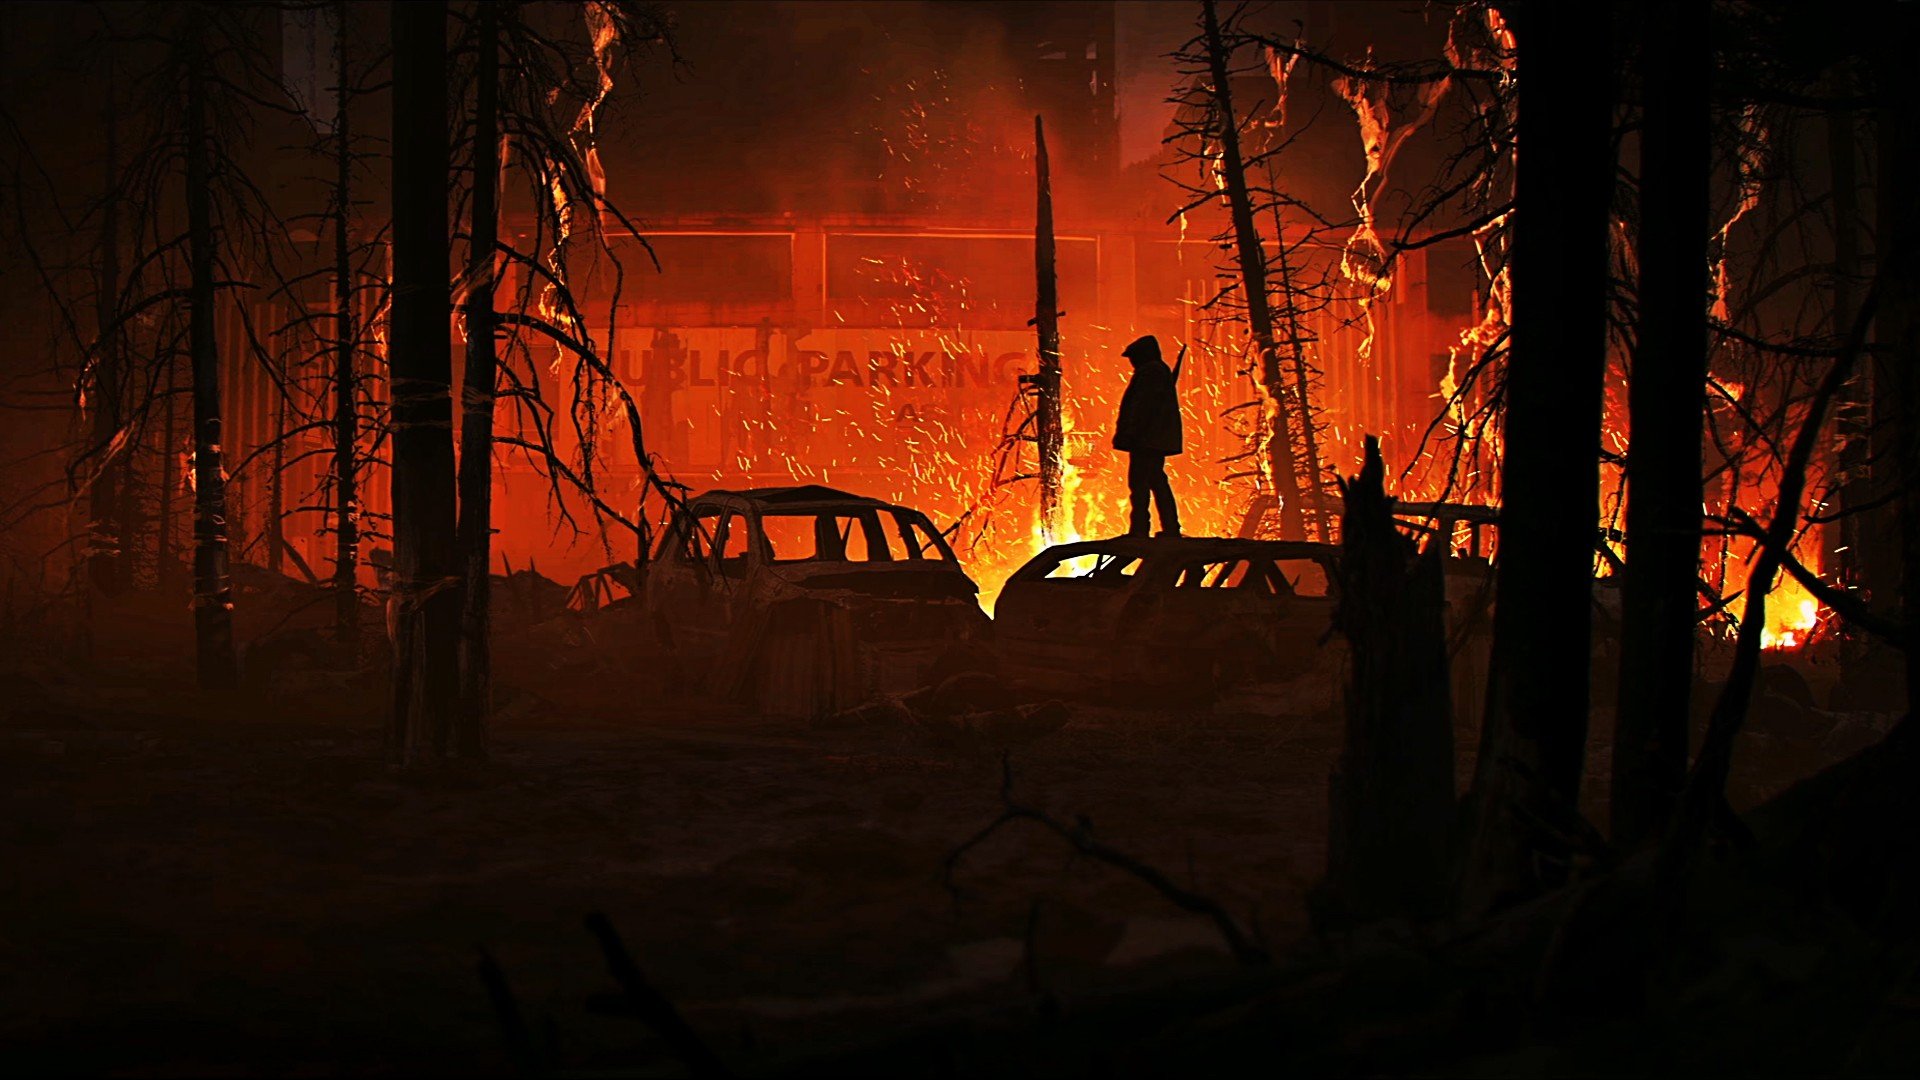 The Last of Us, Naughty Dog, Concept art, Gamer, Fire, Apocalyptic Wallpaper